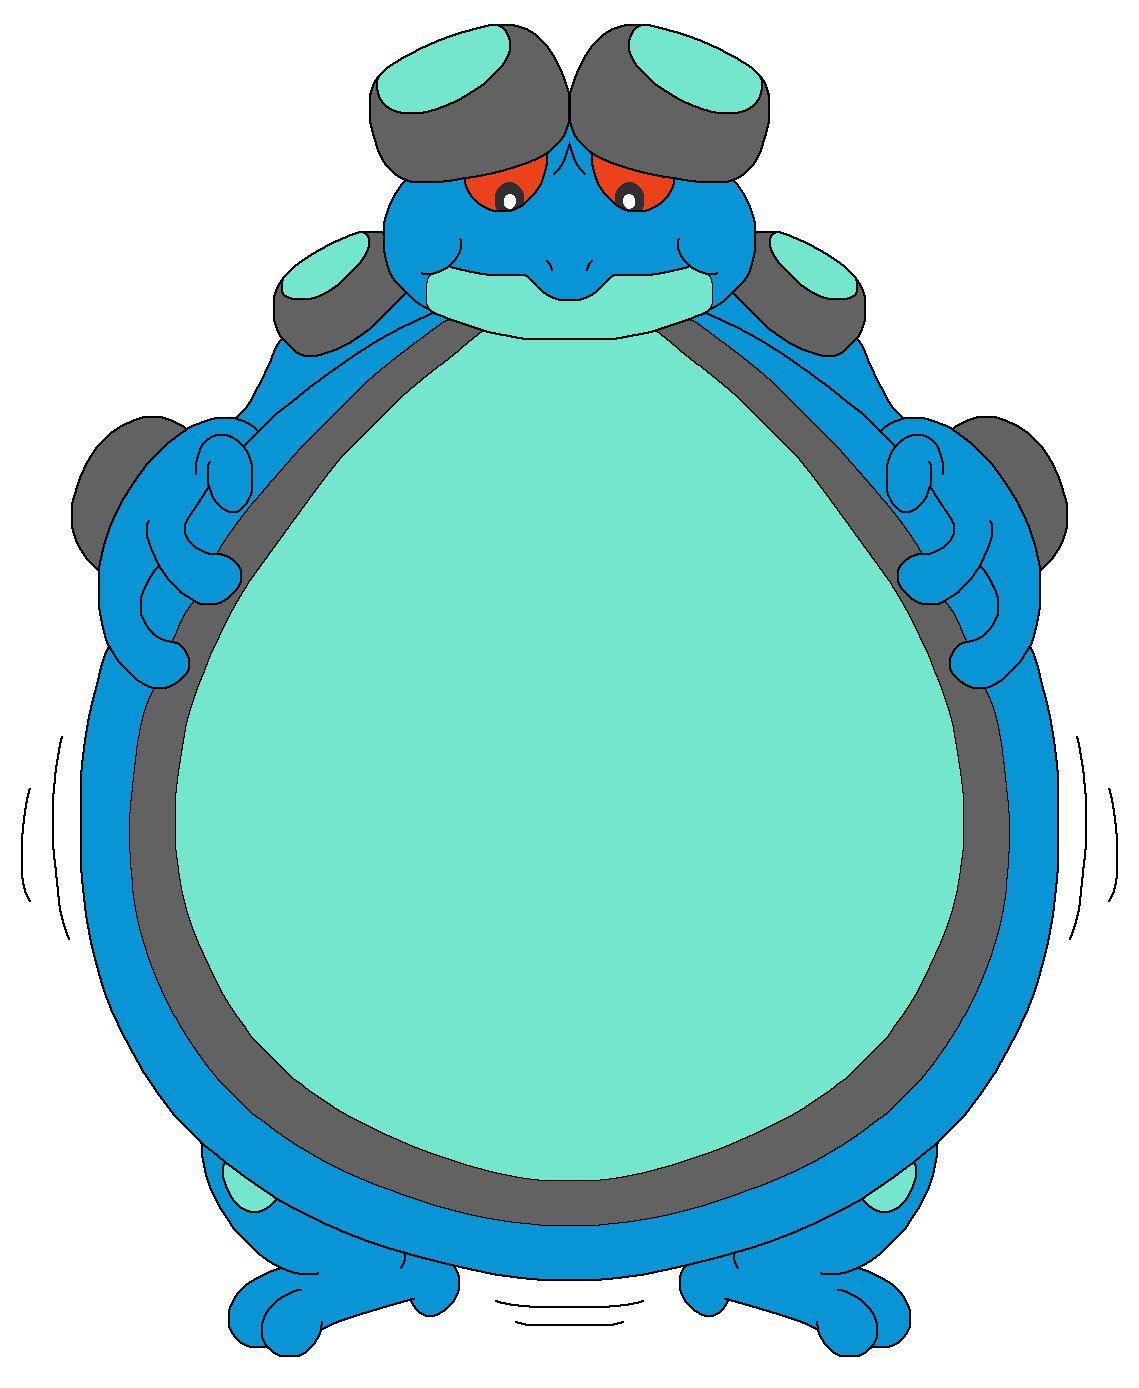 Seismitoad use inflation